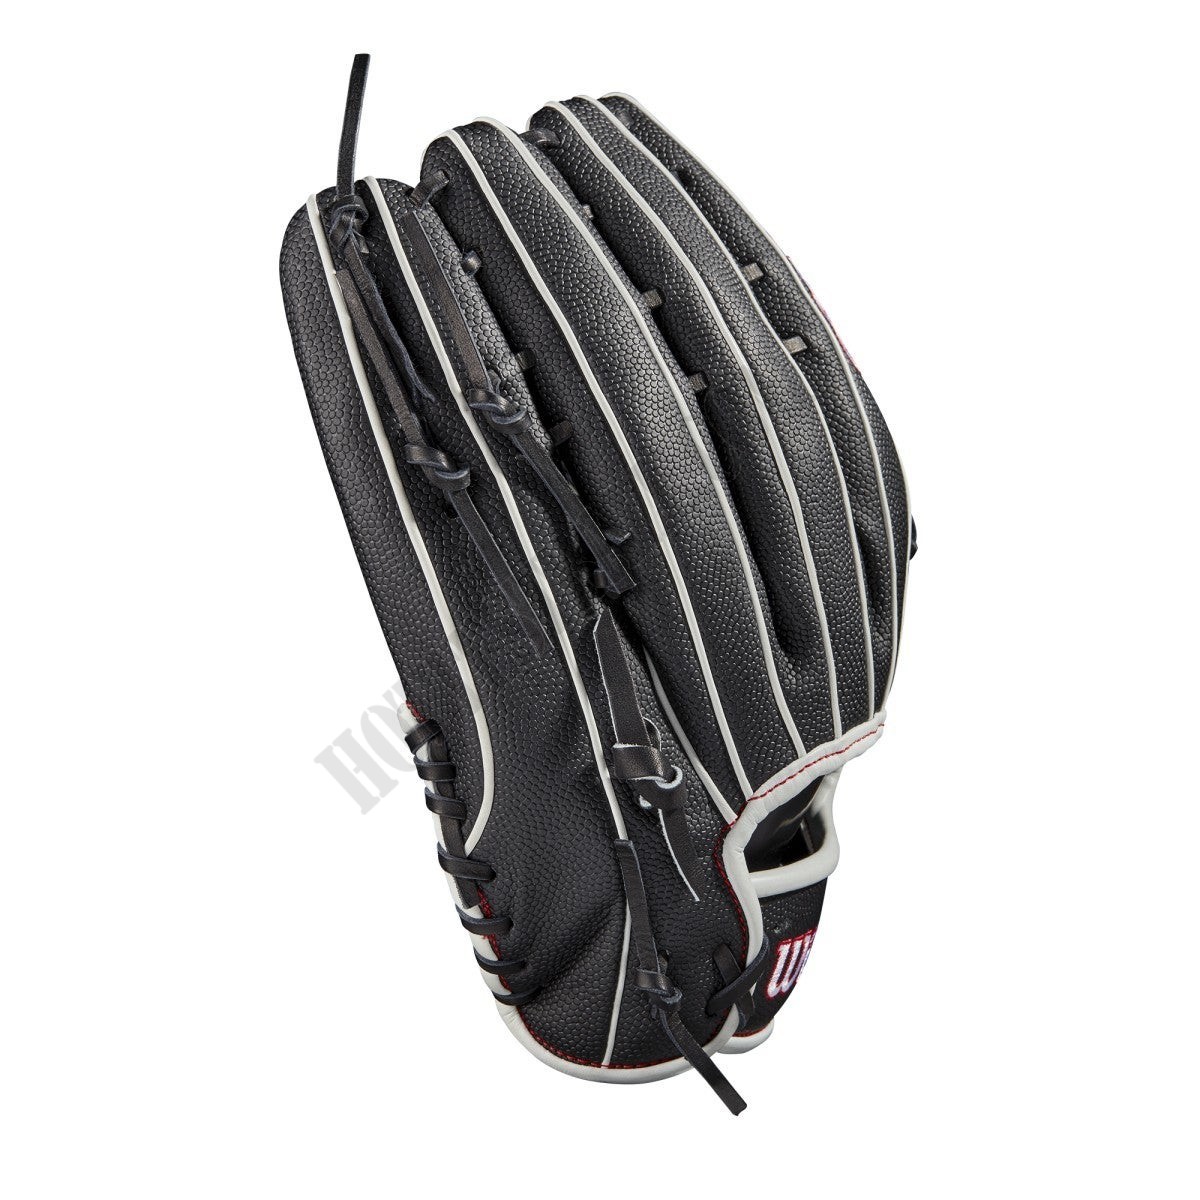 2021 A2000 SCOT7SS 12.75" Outfield Baseball Glove ● Wilson Promotions - -4